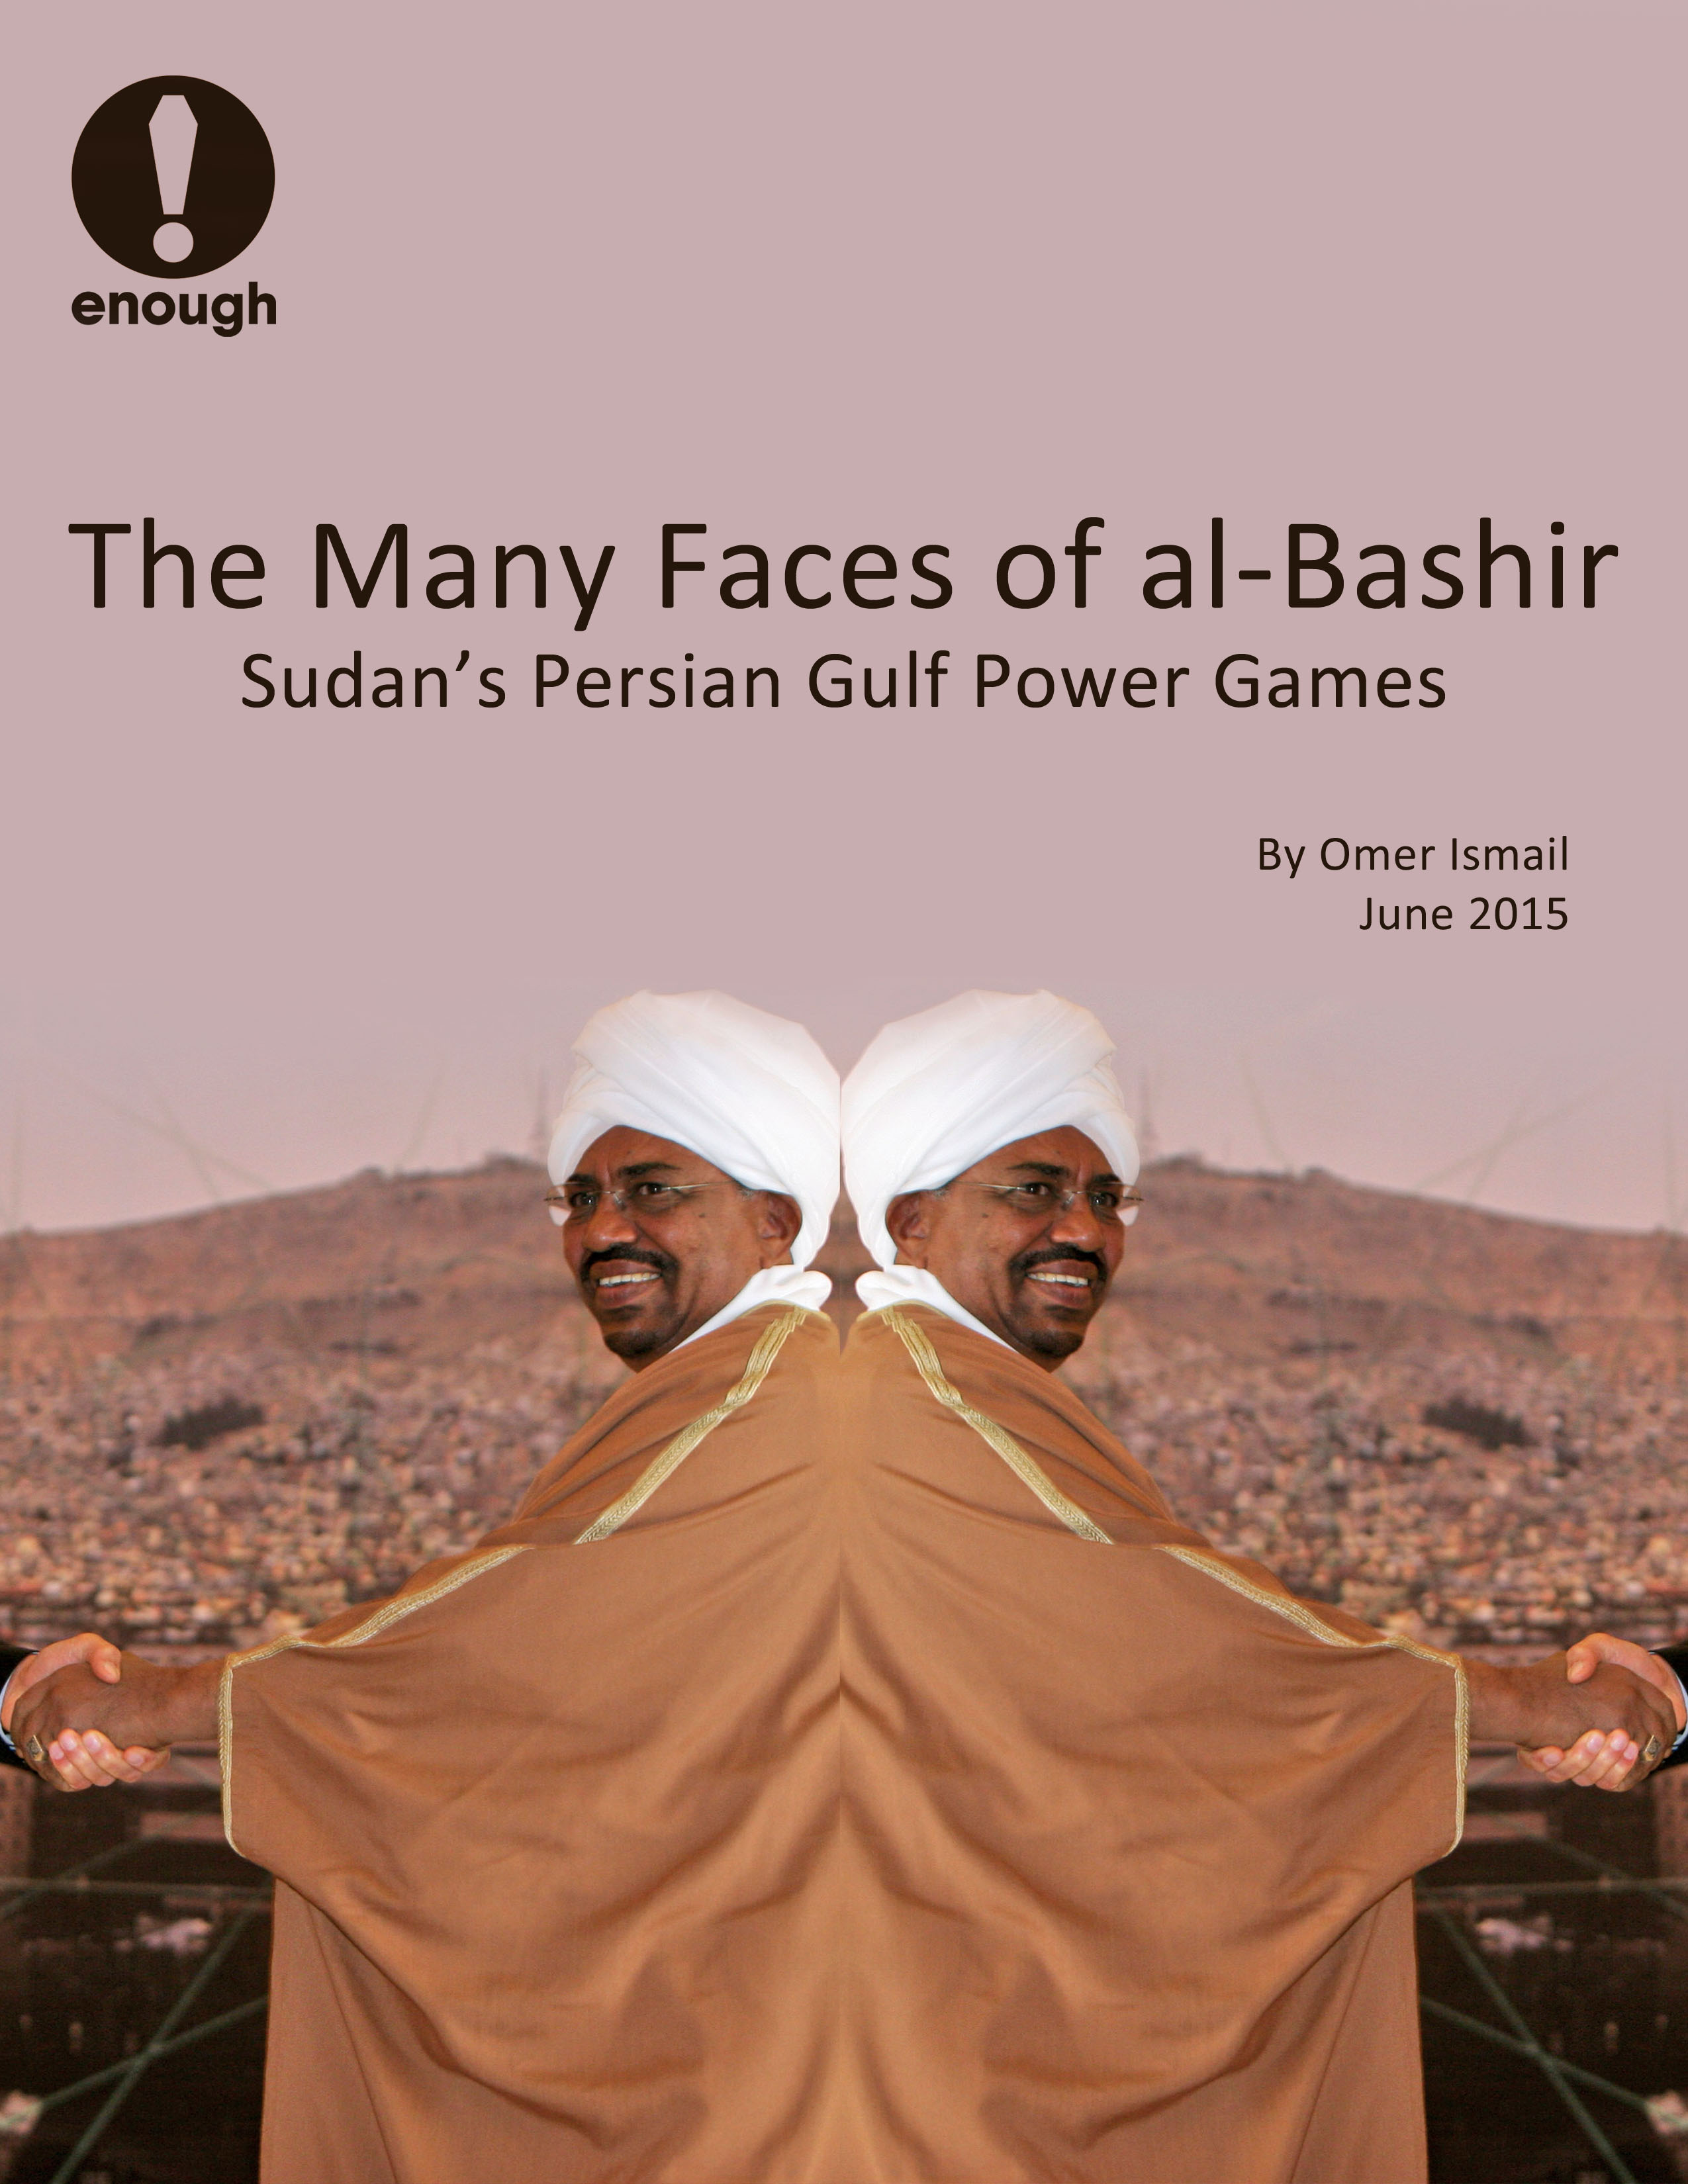 The Many Faces of al-Bashir: Sudan's Persian Gulf Power Games